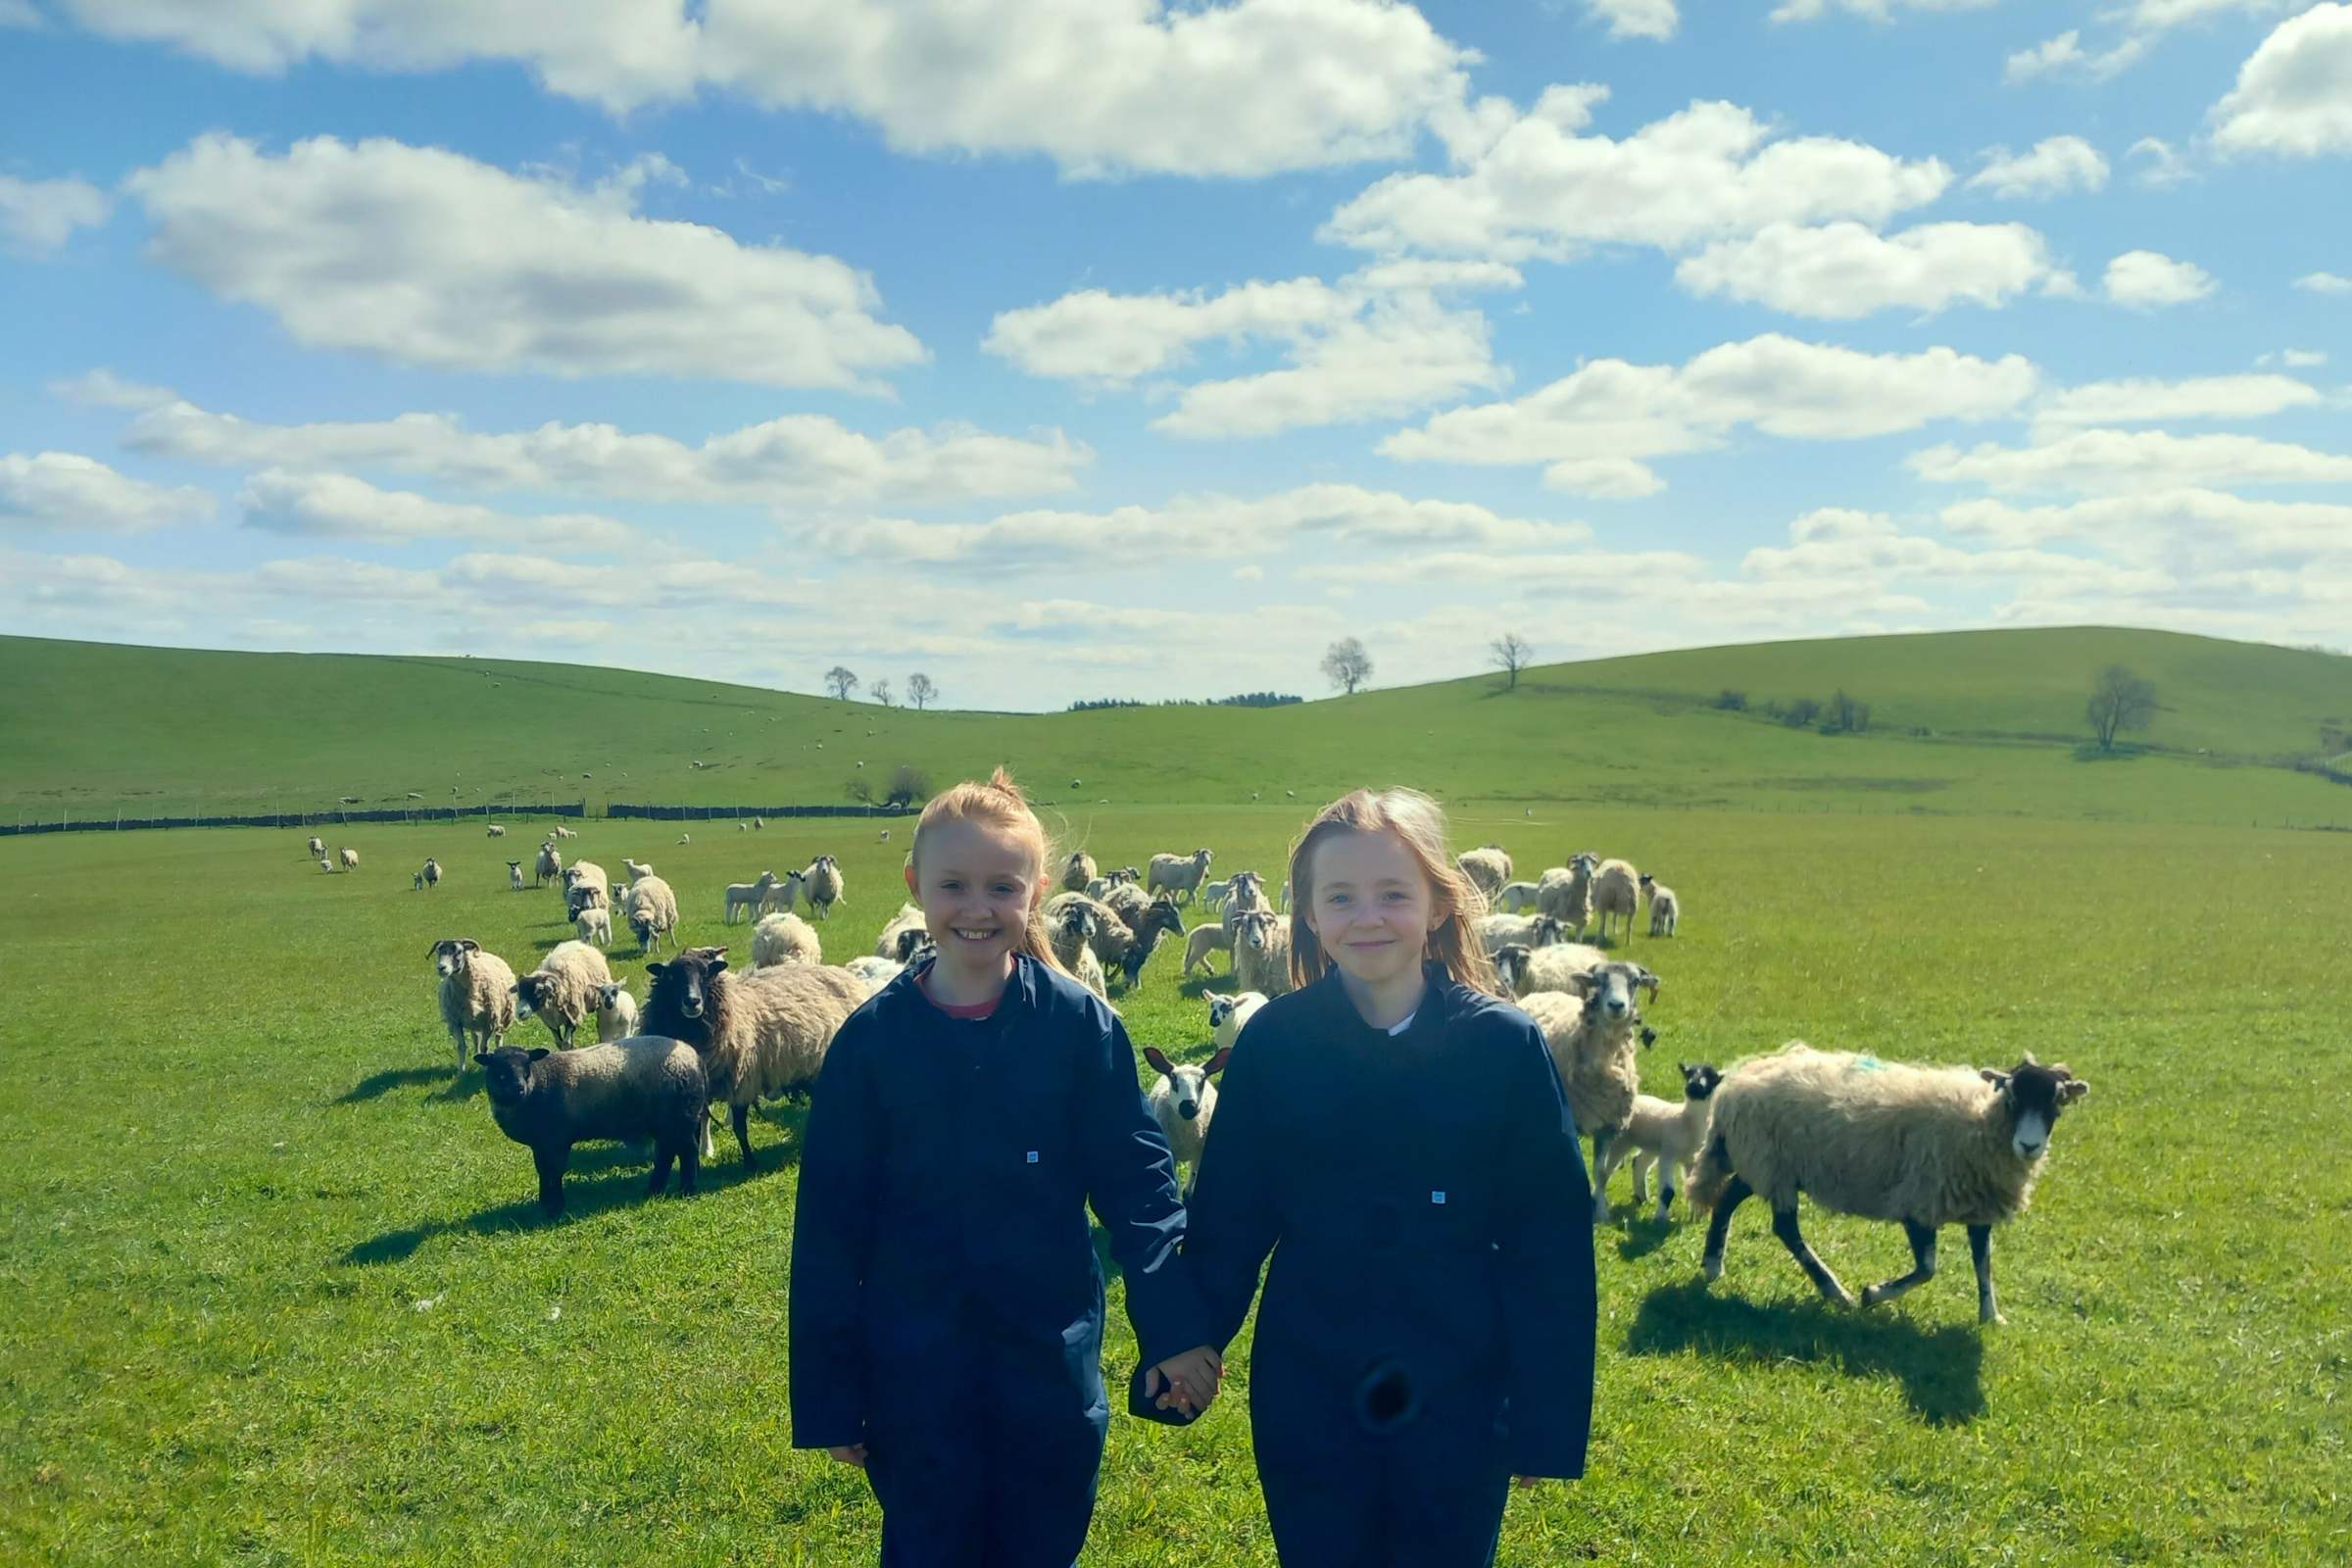 Girls with sheep